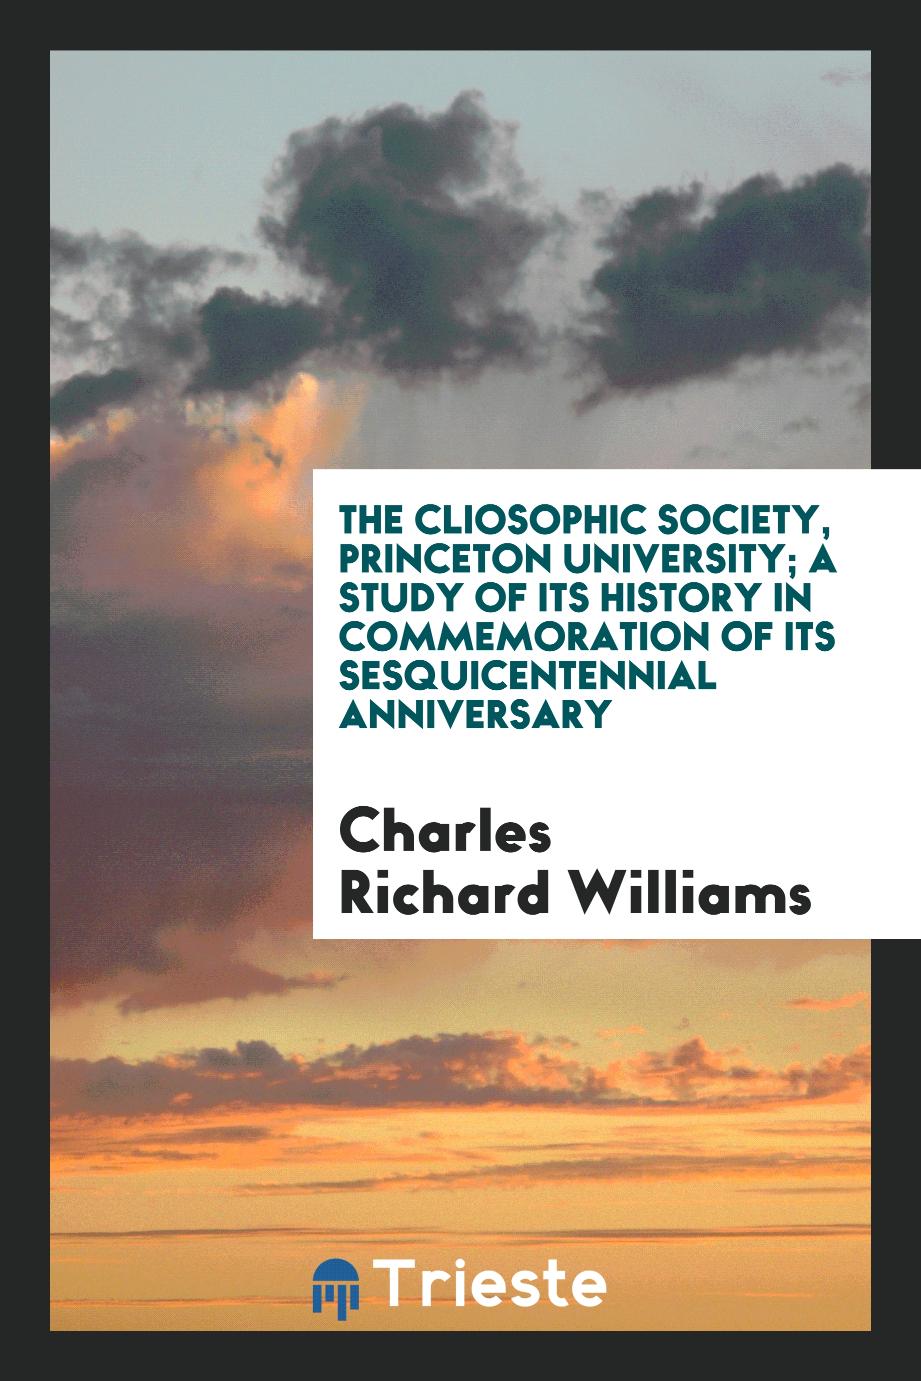 The Cliosophic society, Princeton university; a study of its history in commemoration of its sesquicentennial anniversary